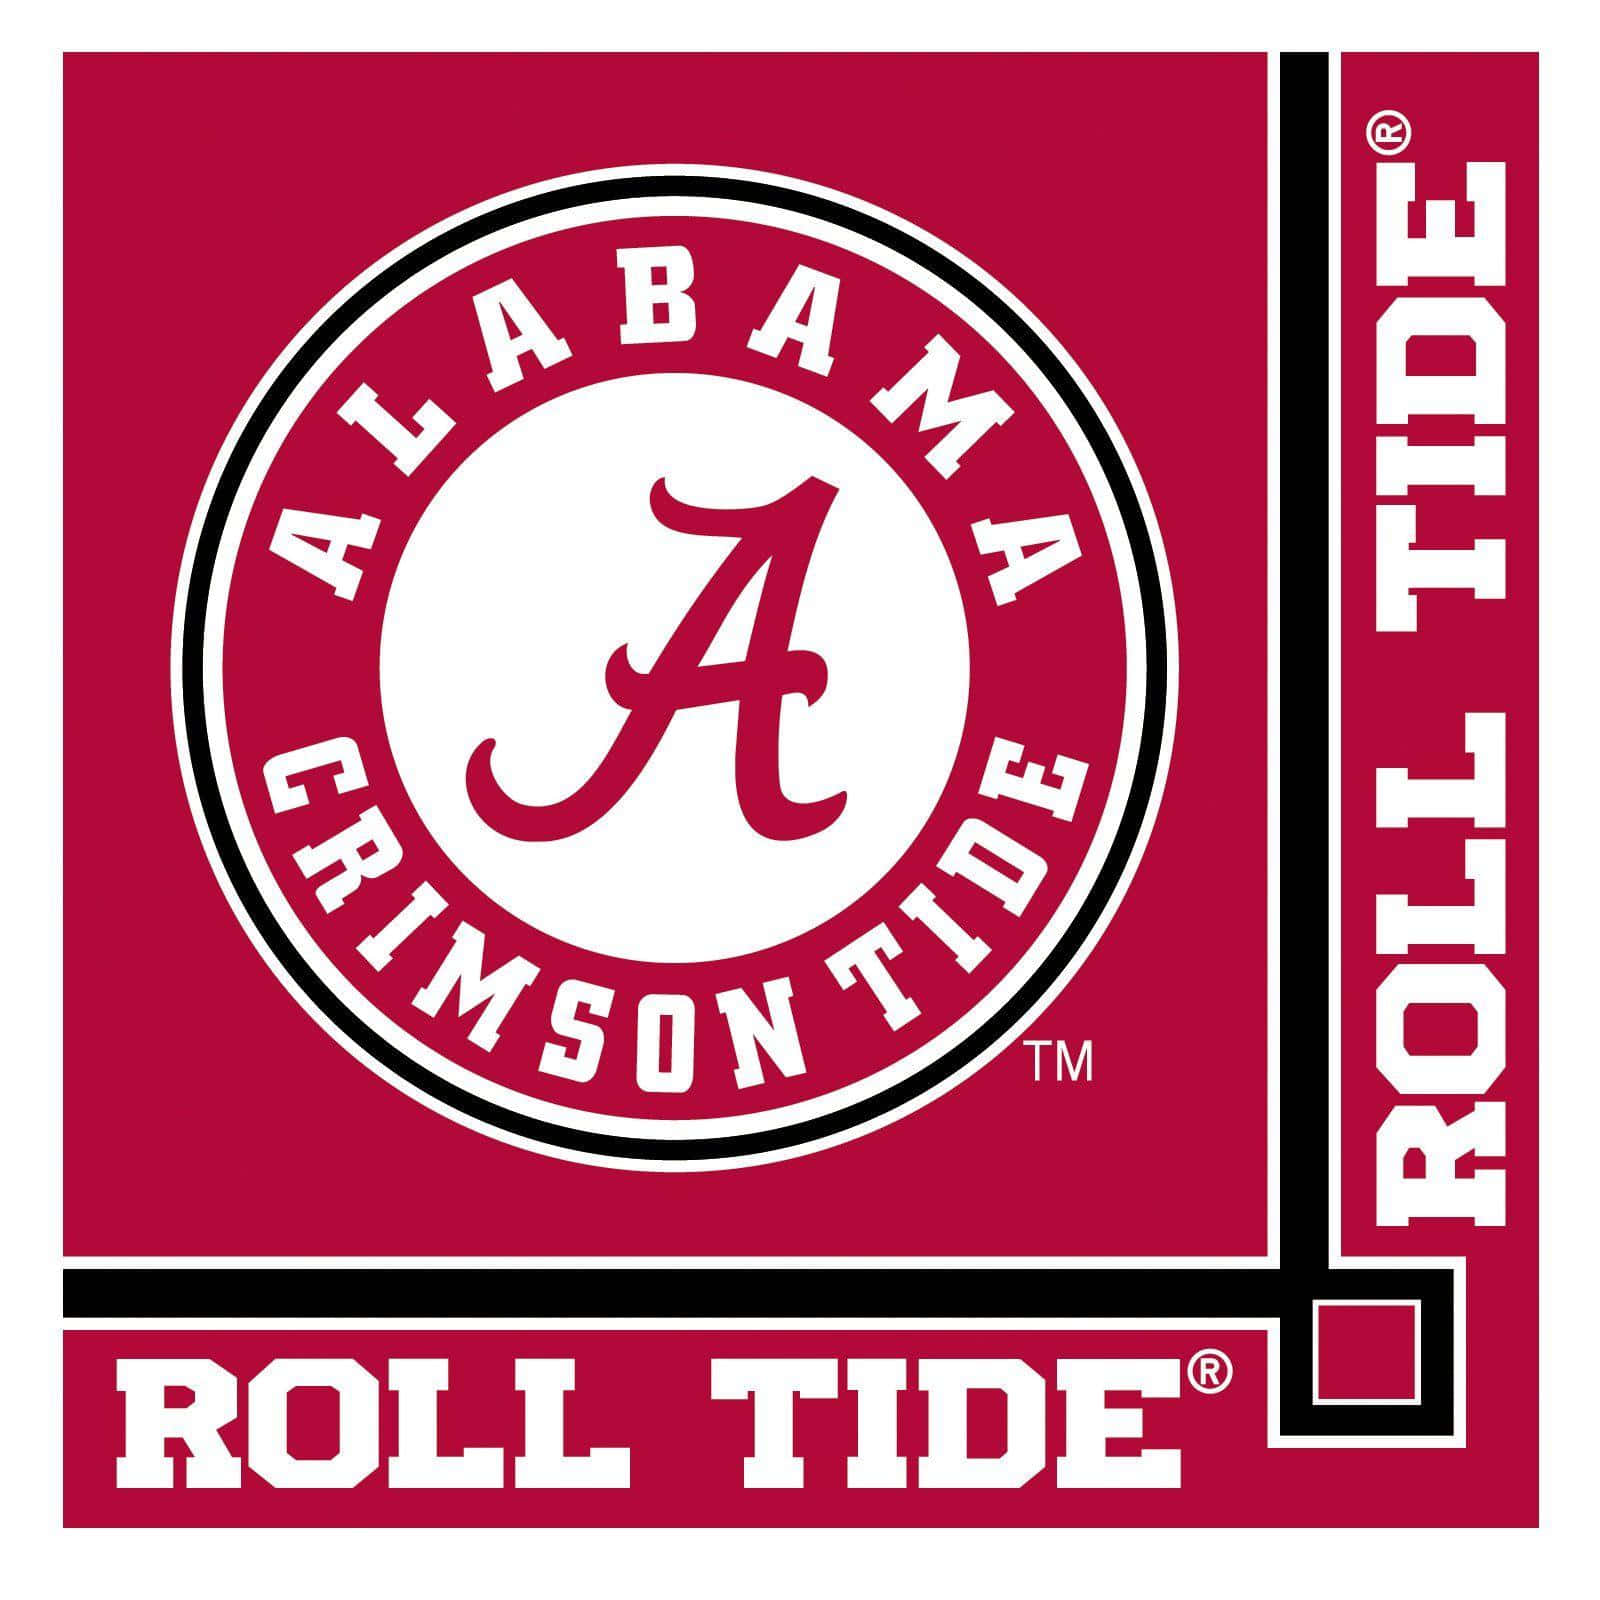 "Hail to the Tide!"